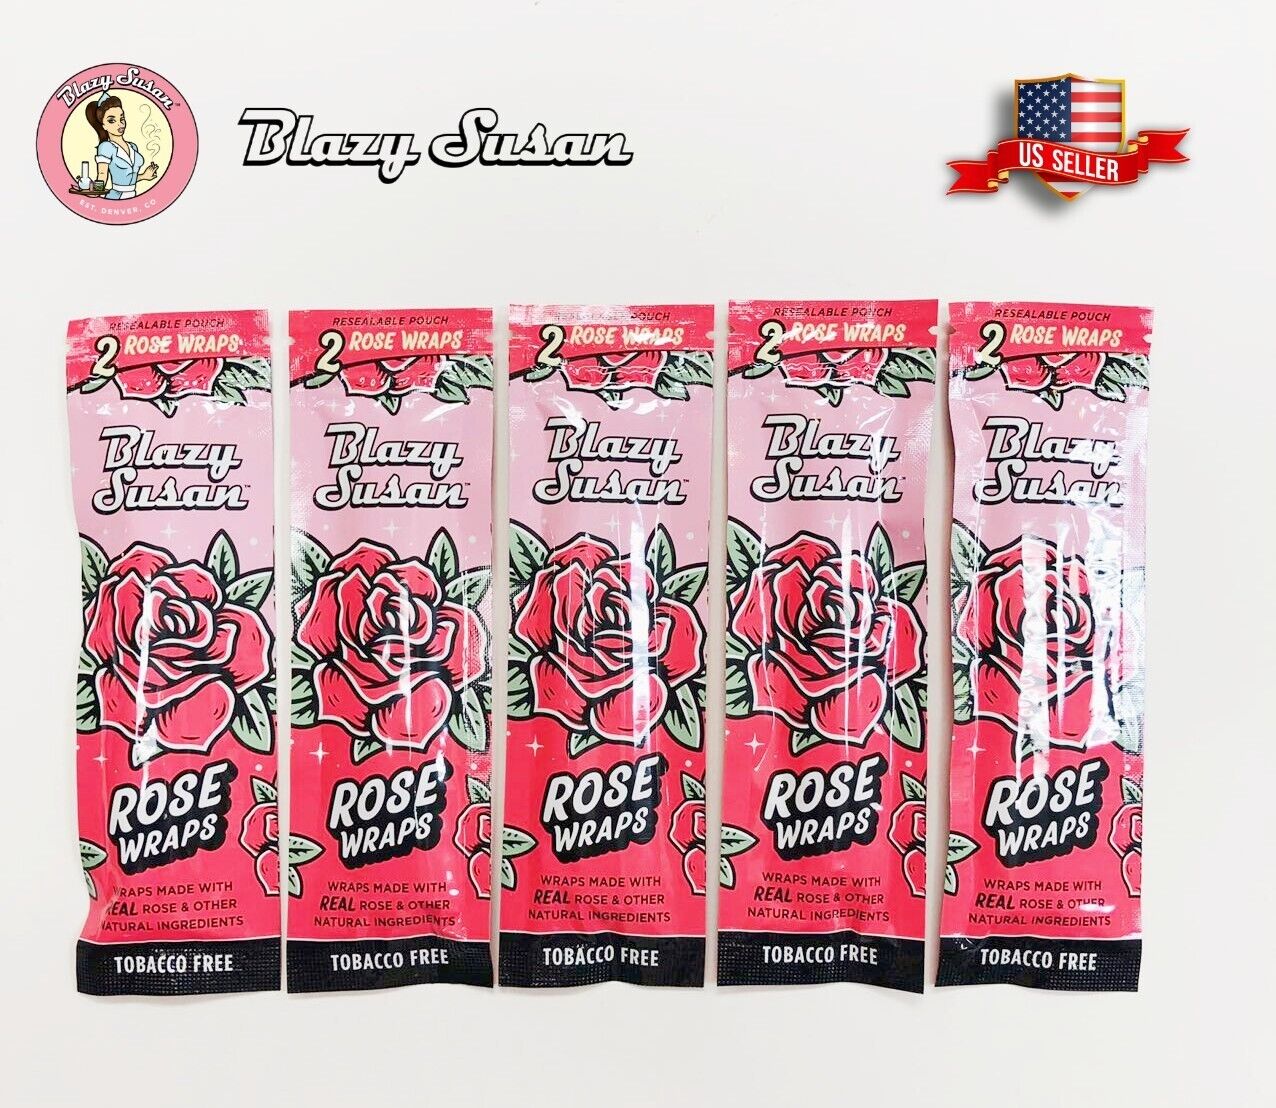 Authentic Blazy Susan Rose Pre-Rolls Wraps | 5 Packs Made with Real Rose